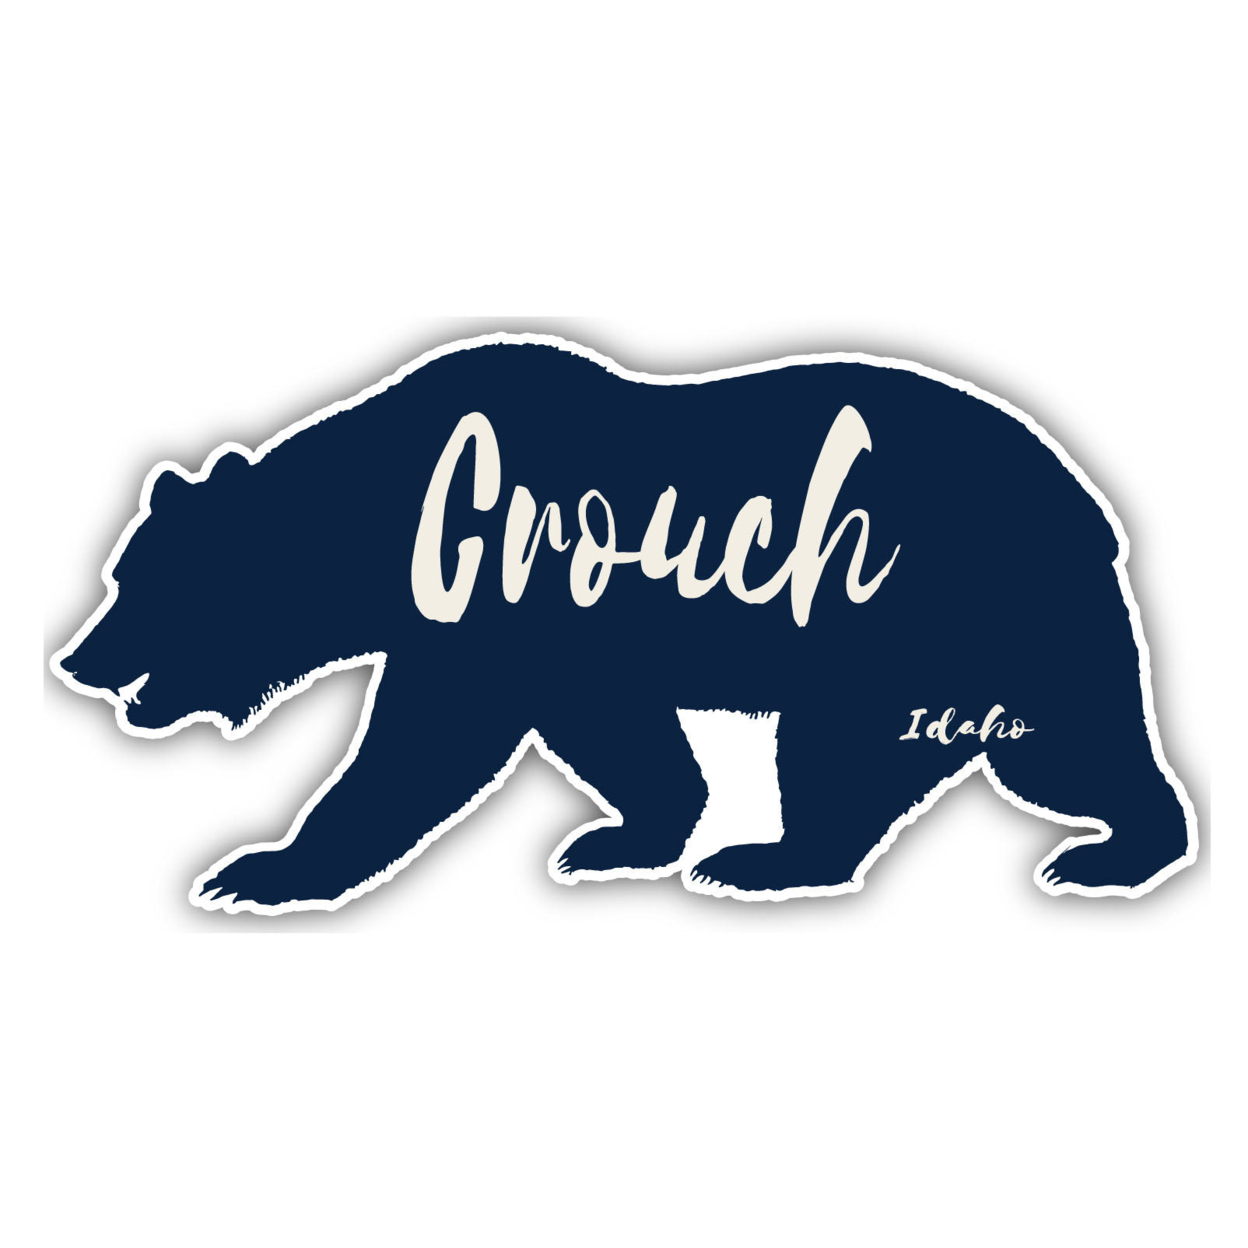 Crouch Idaho Souvenir Decorative Stickers (Choose Theme And Size) - 4-Pack, 6-Inch, Bear